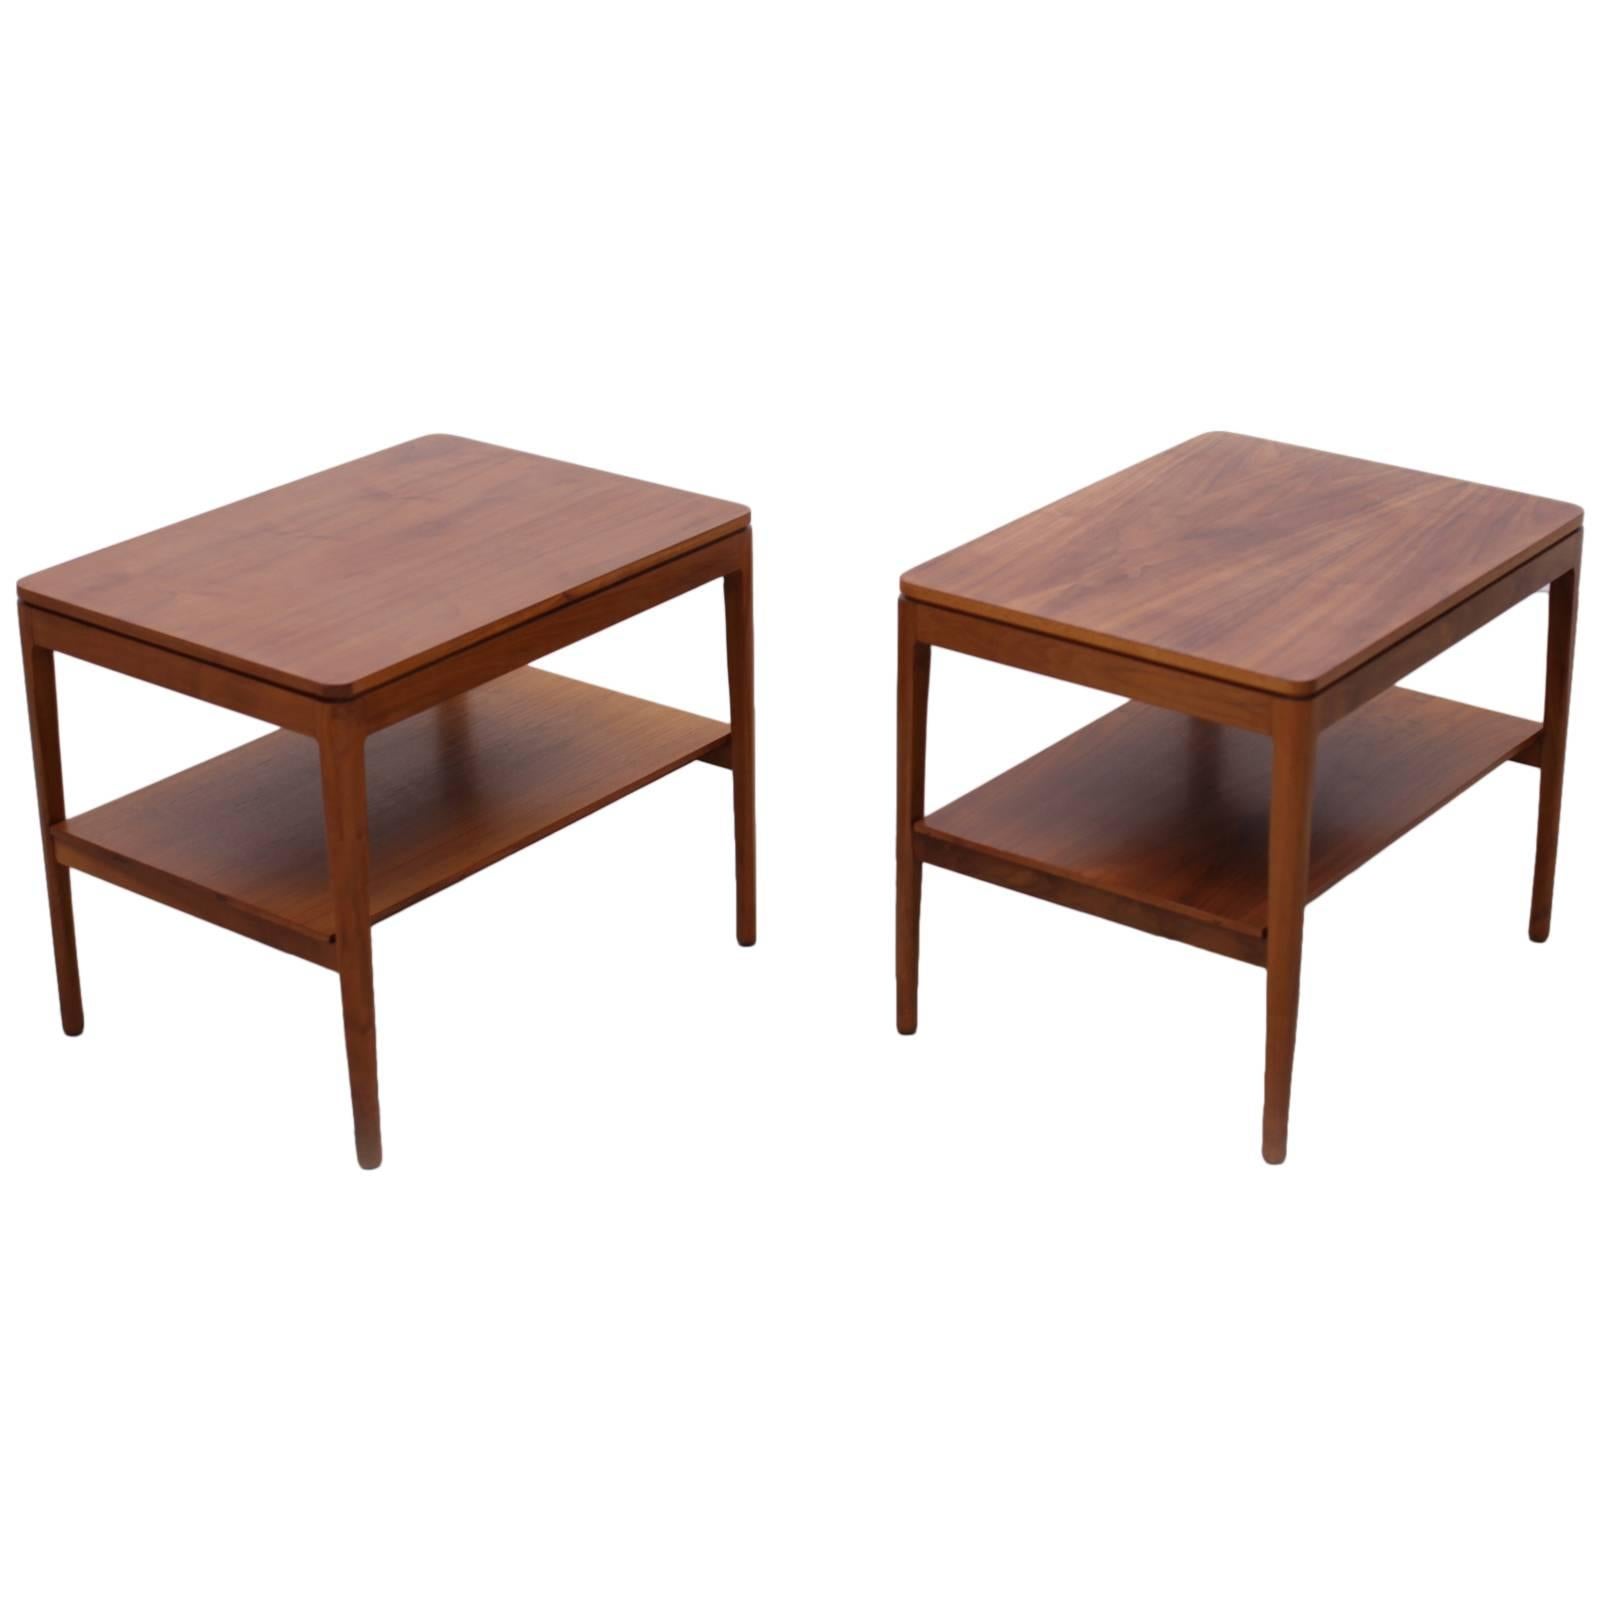 Pair of Kipp Stewart Night Stands or Side Tables in Walnut for Drexel